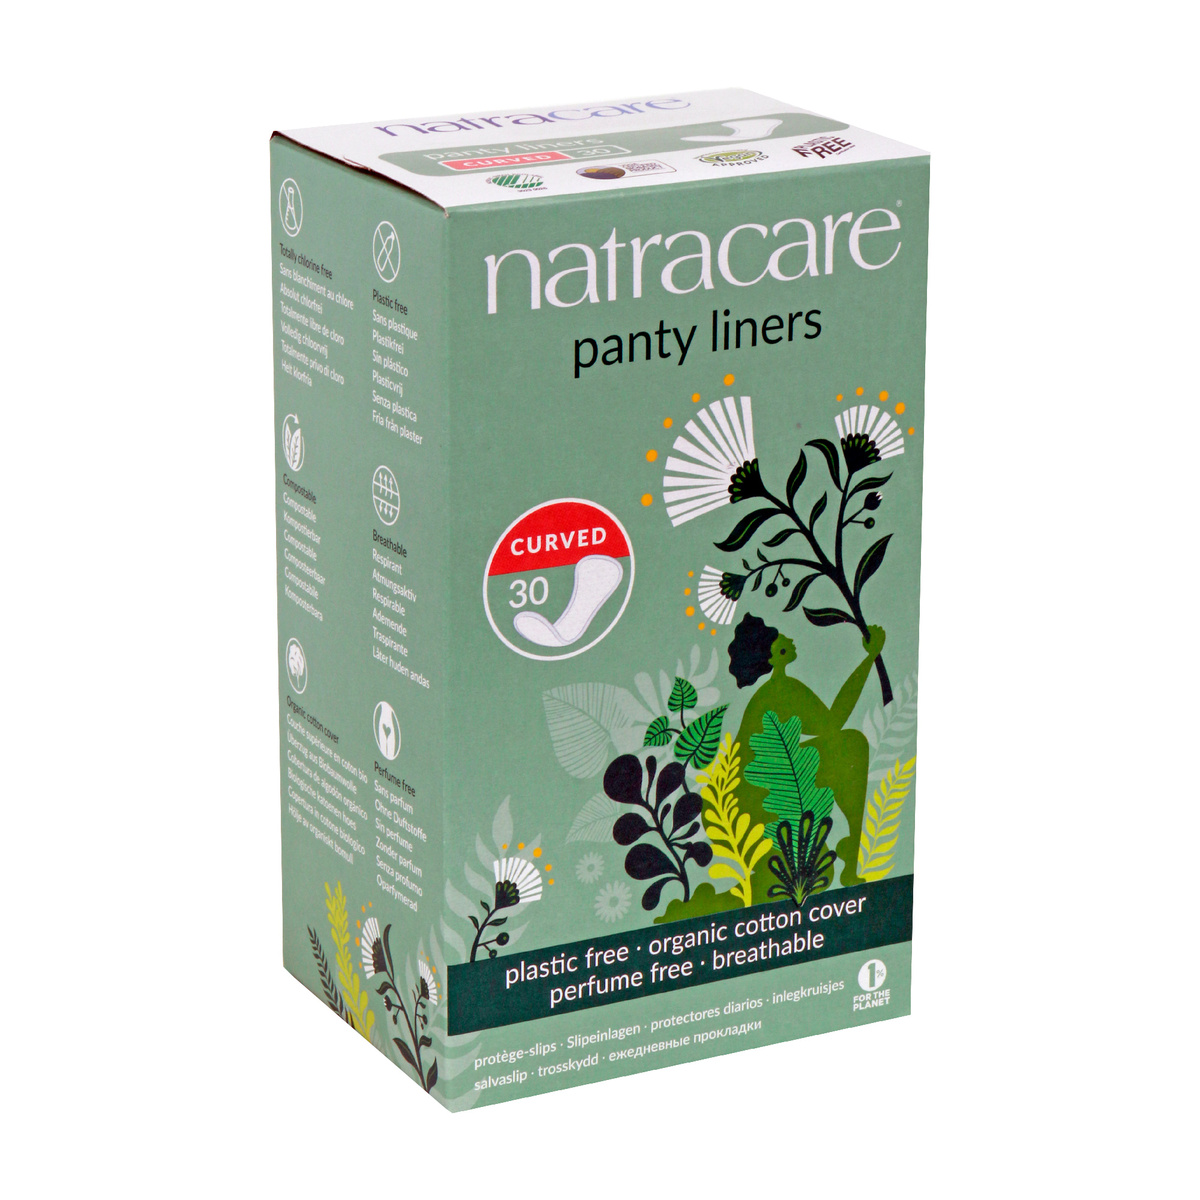 Natracare Panty Liners Curved 30pcs